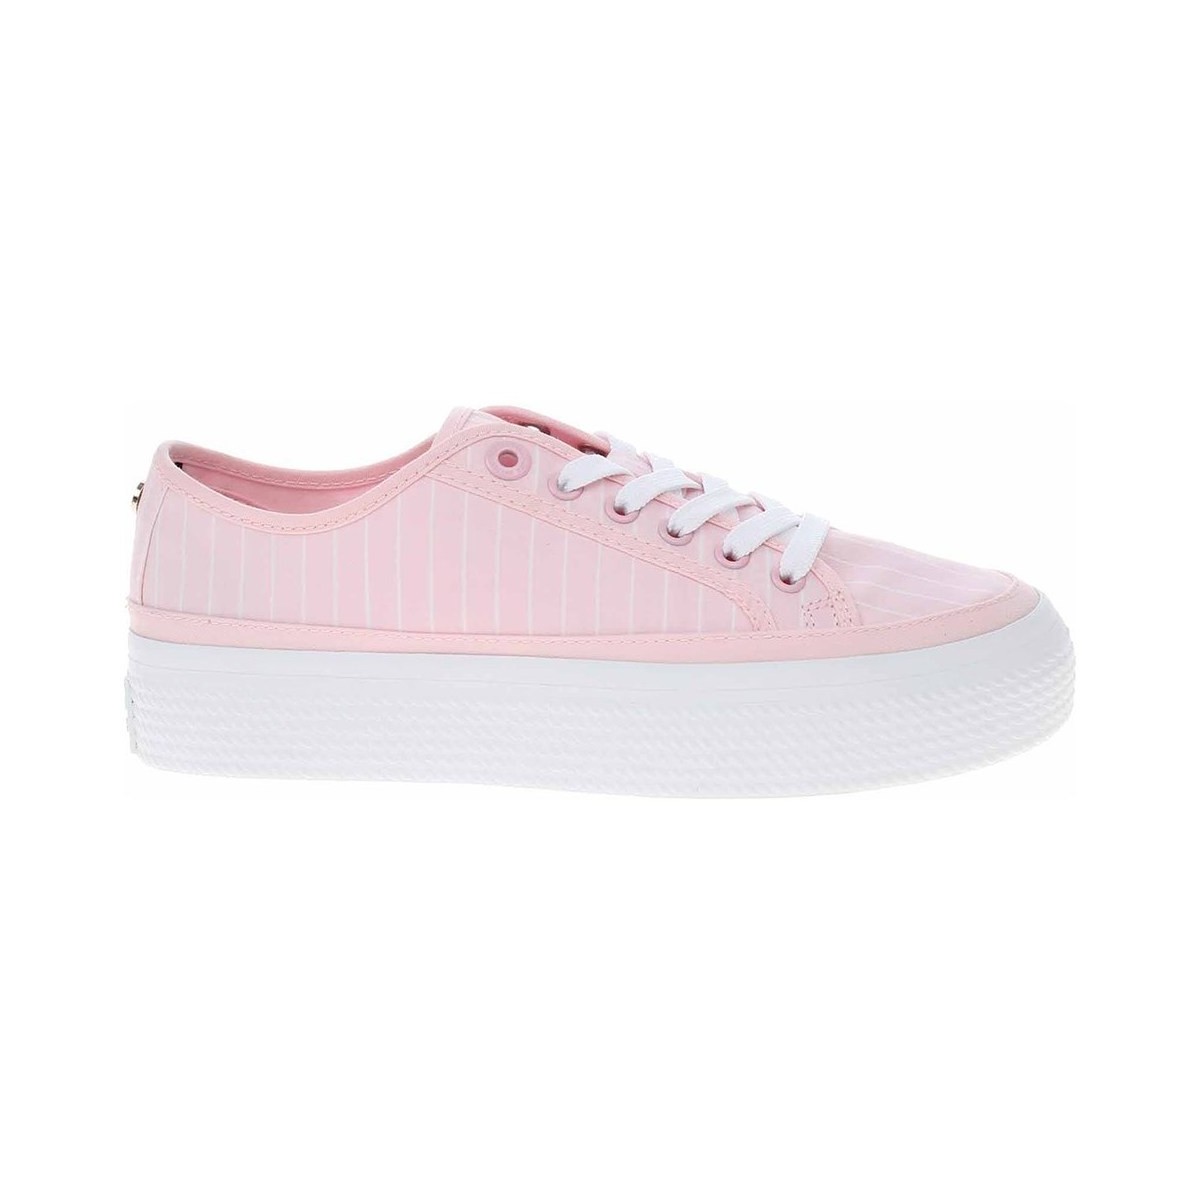 Chaussures Femme Baskets basses Tommy Hilfiger FW0FW06530TPD Rose